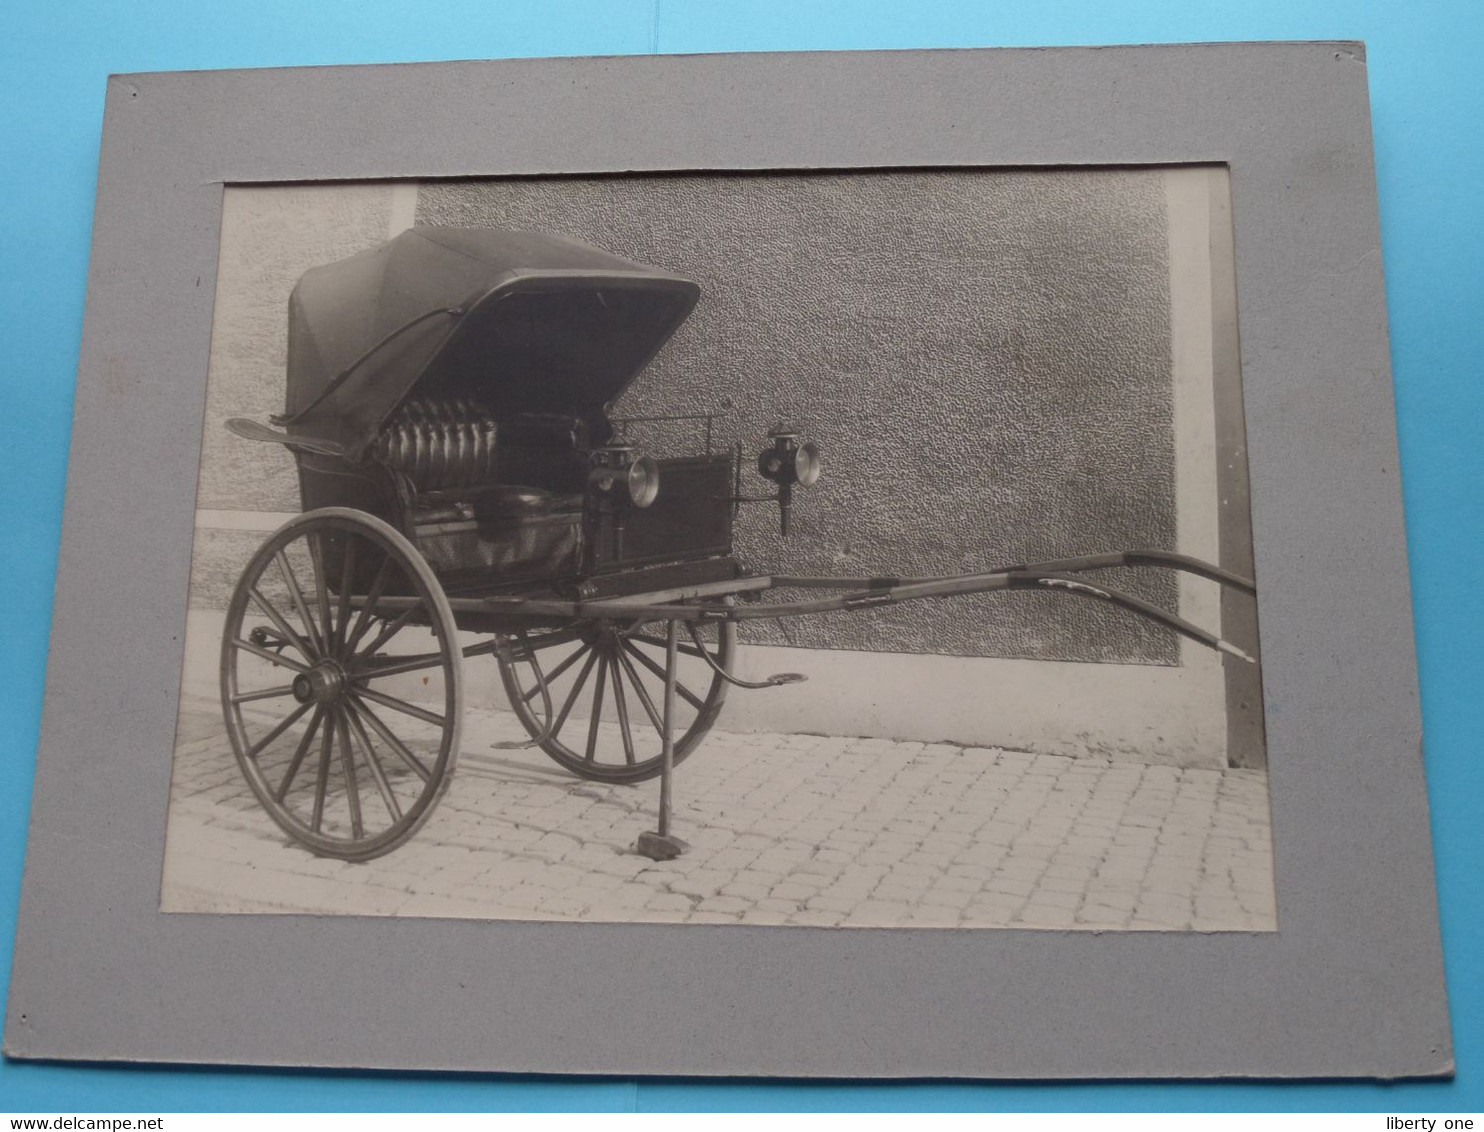 CABRIOLET +/- 1930 ( Koets / Rijtuig - Carriage / Chariot ) Photo LEROY ( Formaat 28 X 21,5 Cm.) ! - Objects